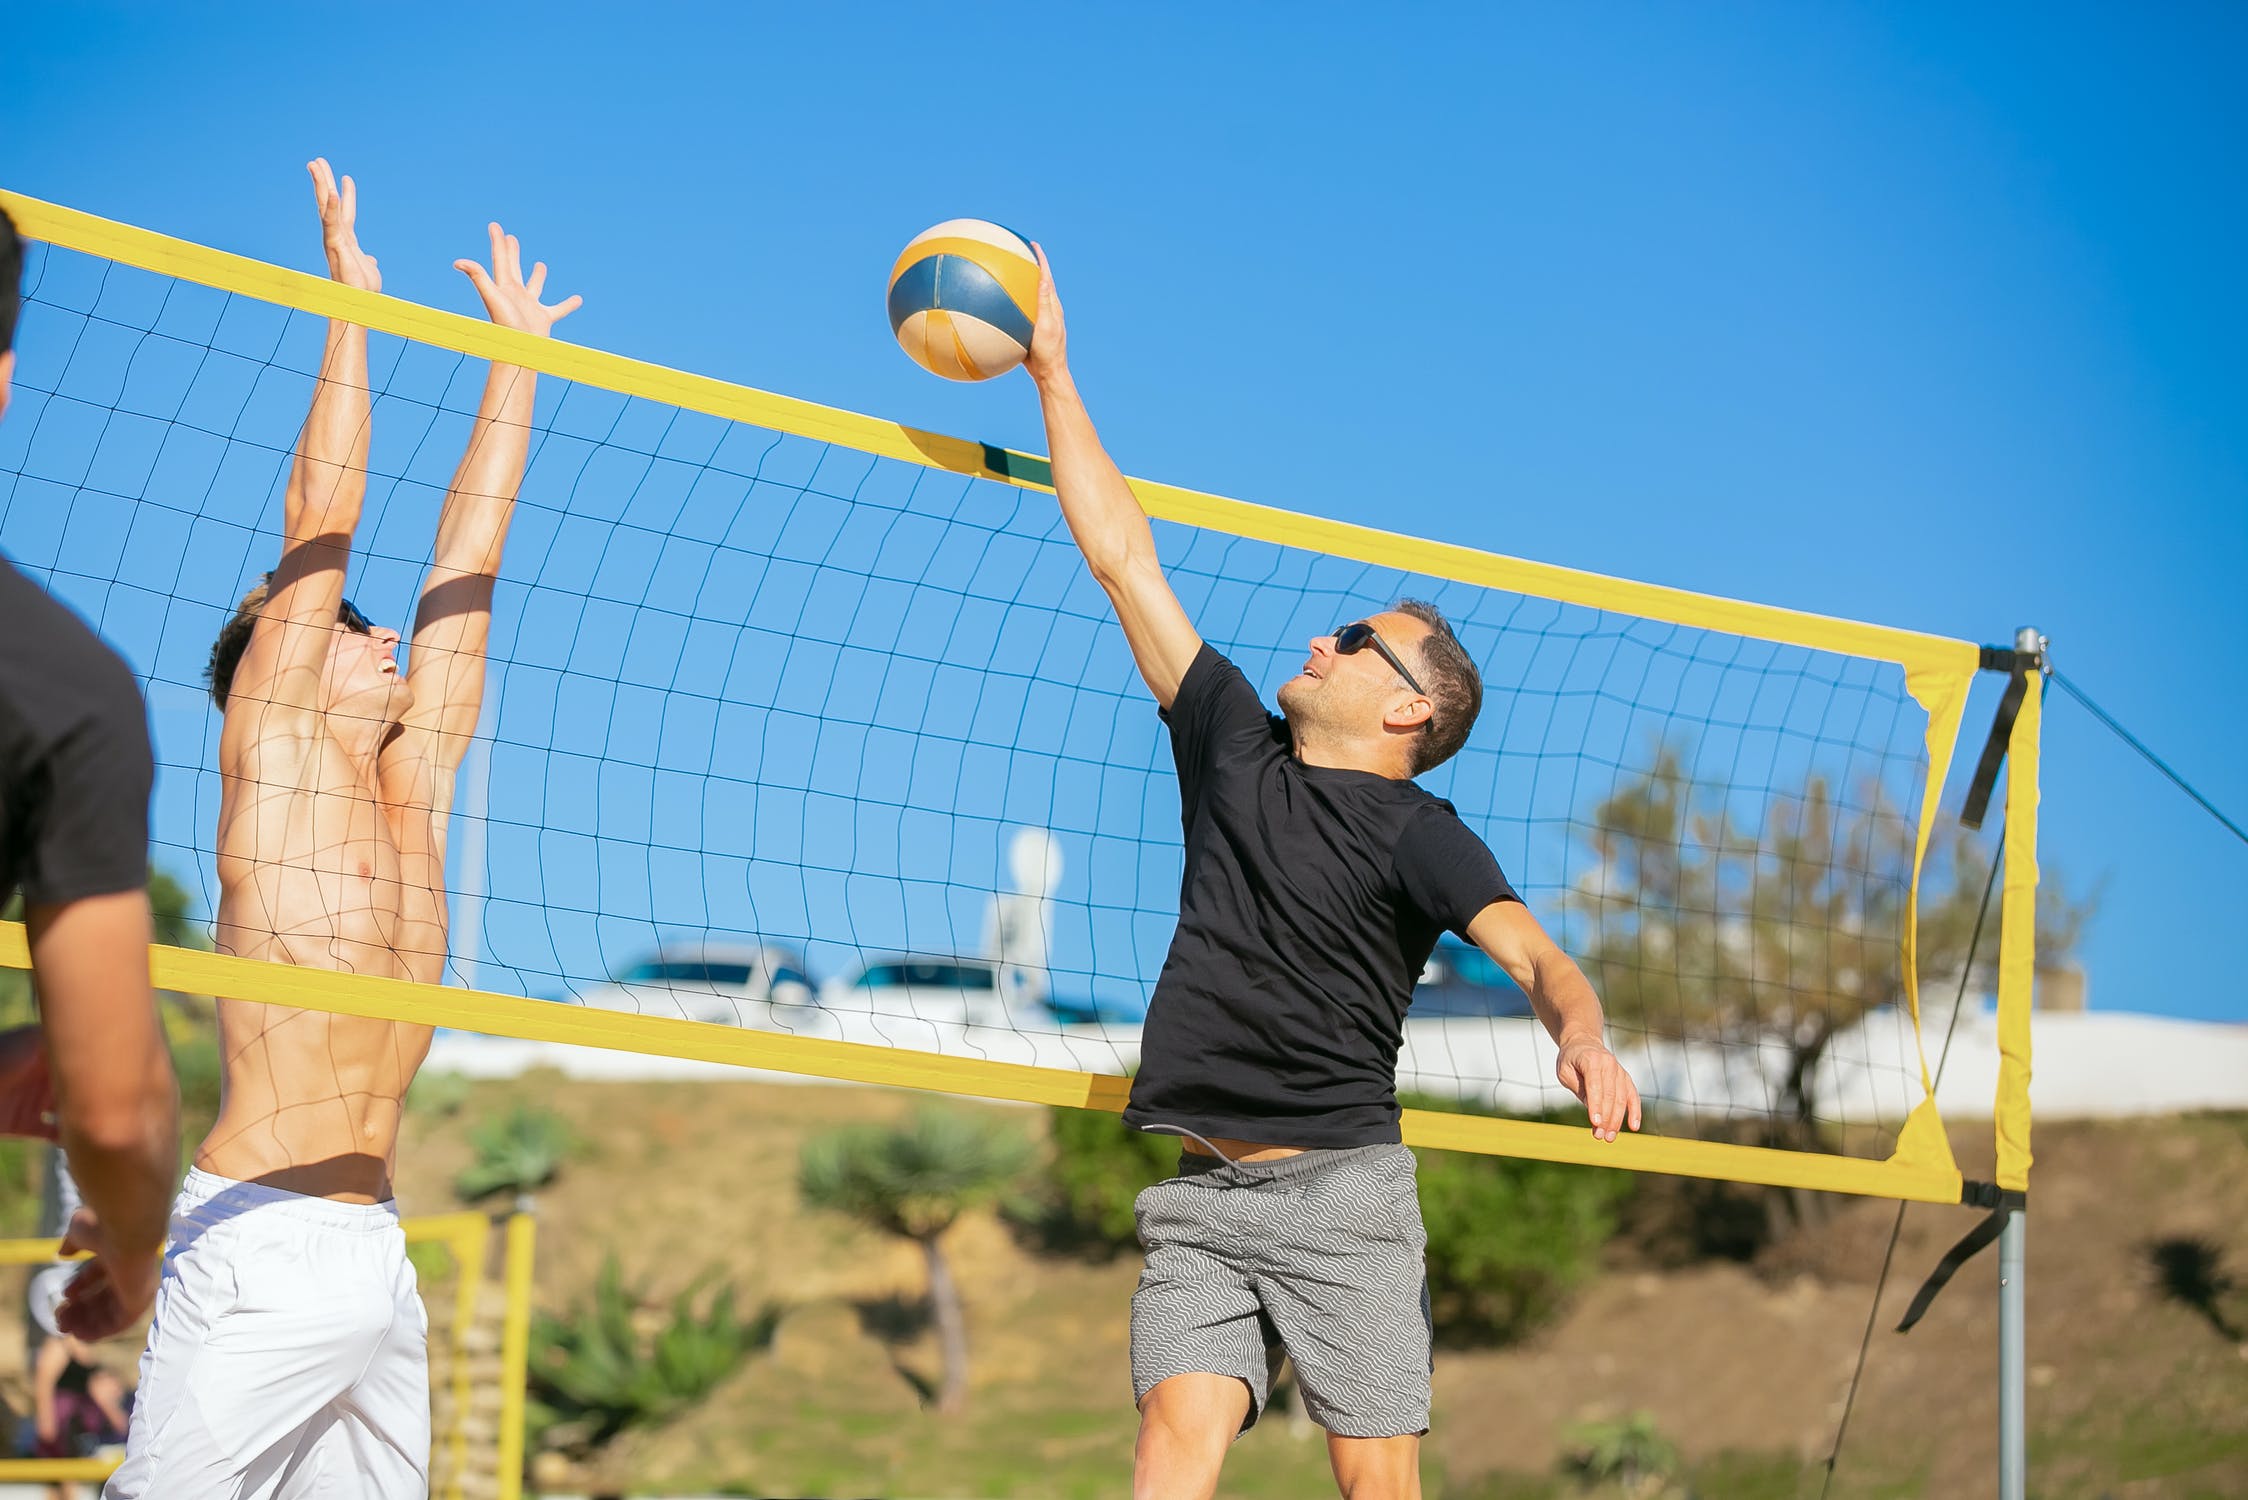 Best Sunglasses To Wear While Playing Beach Volleyball